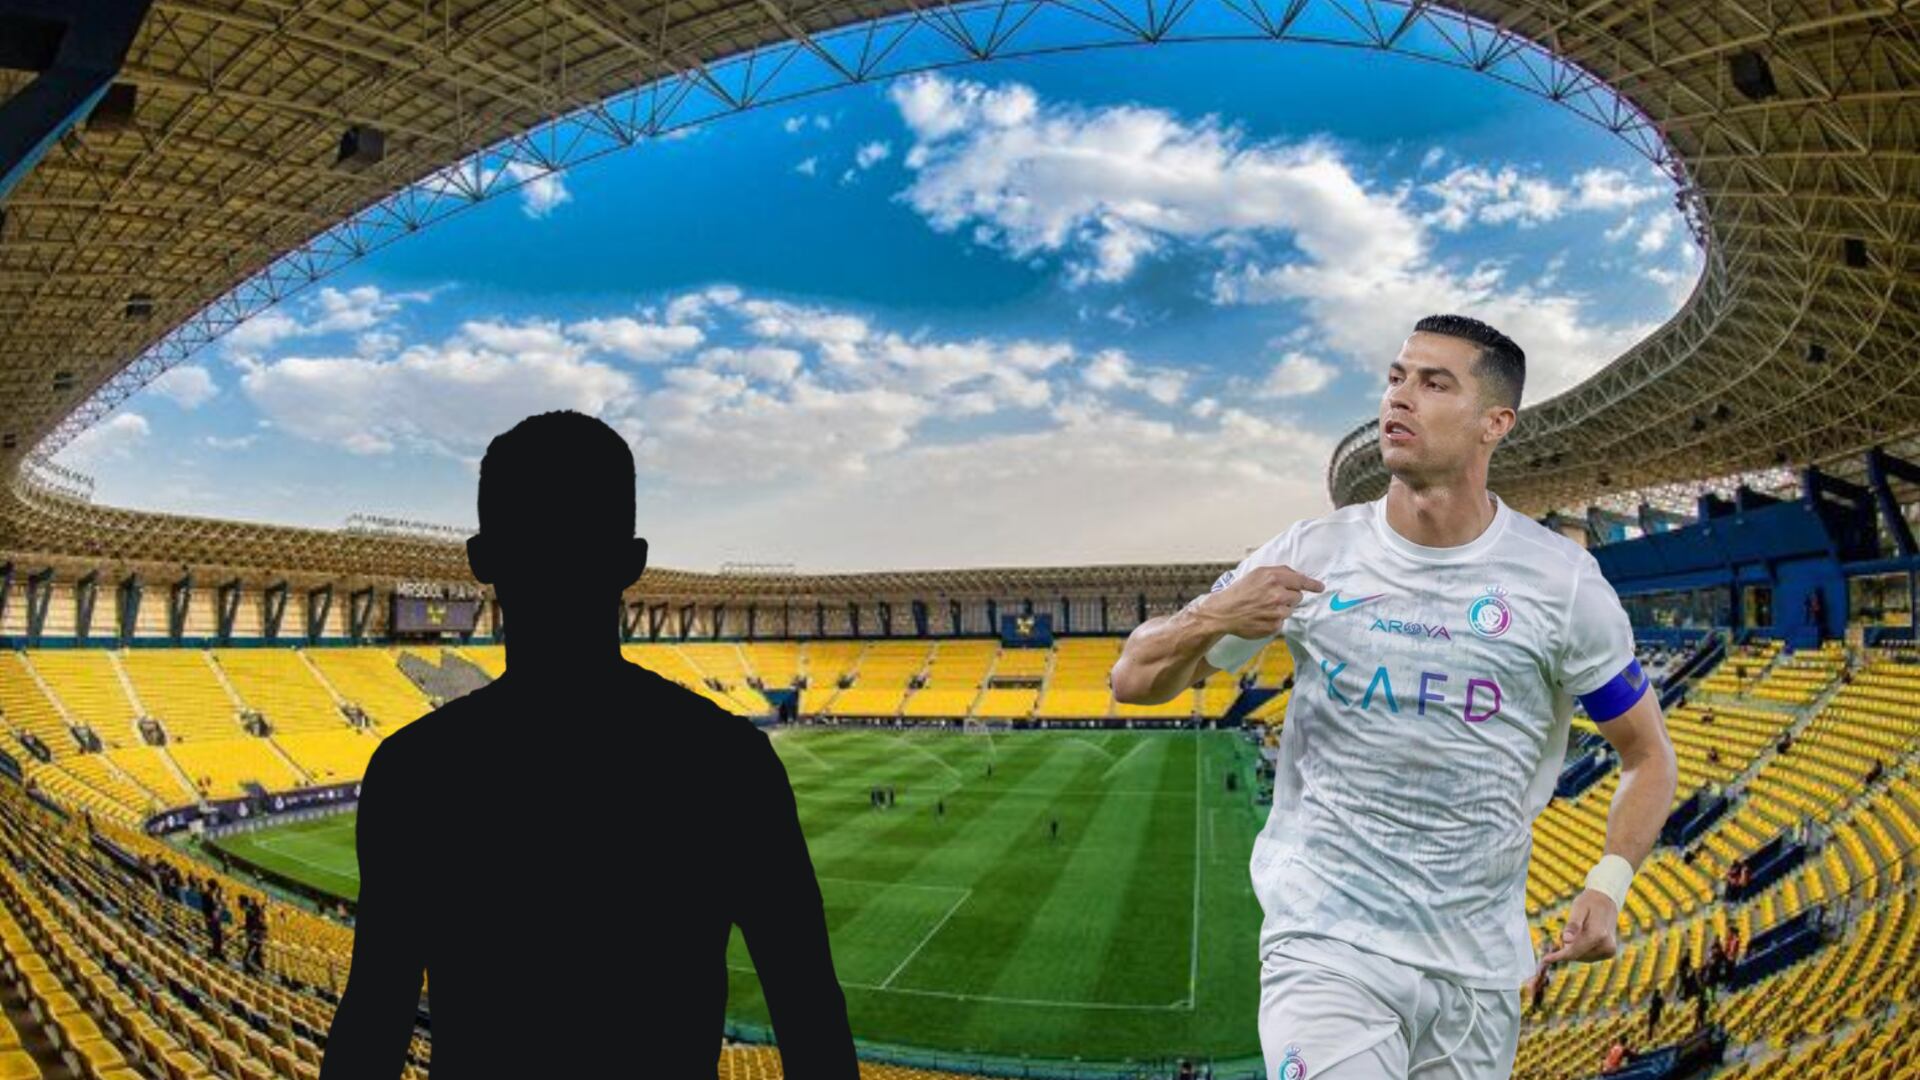 Back to Europe? The Al Nassr player who could leave Cristiano Ronaldo alone